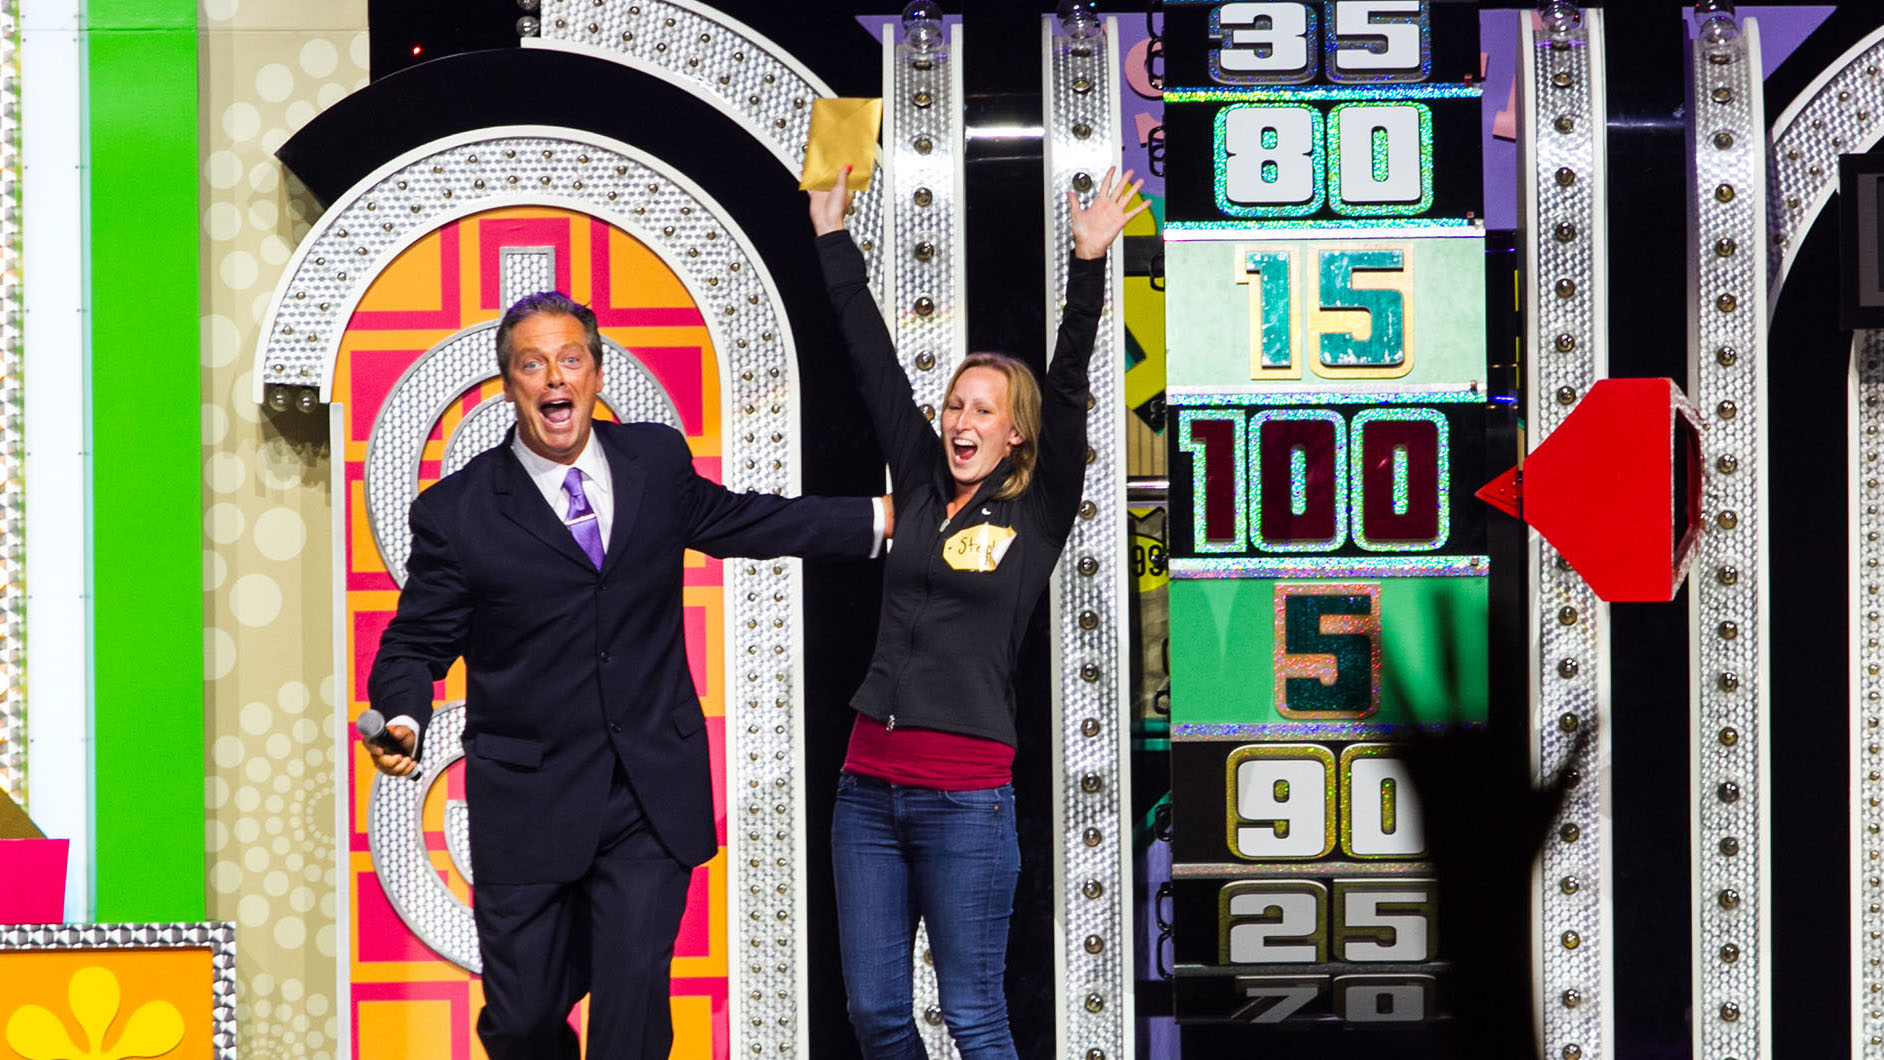 The Price is Right Live' at the Coral Springs Center for the Arts